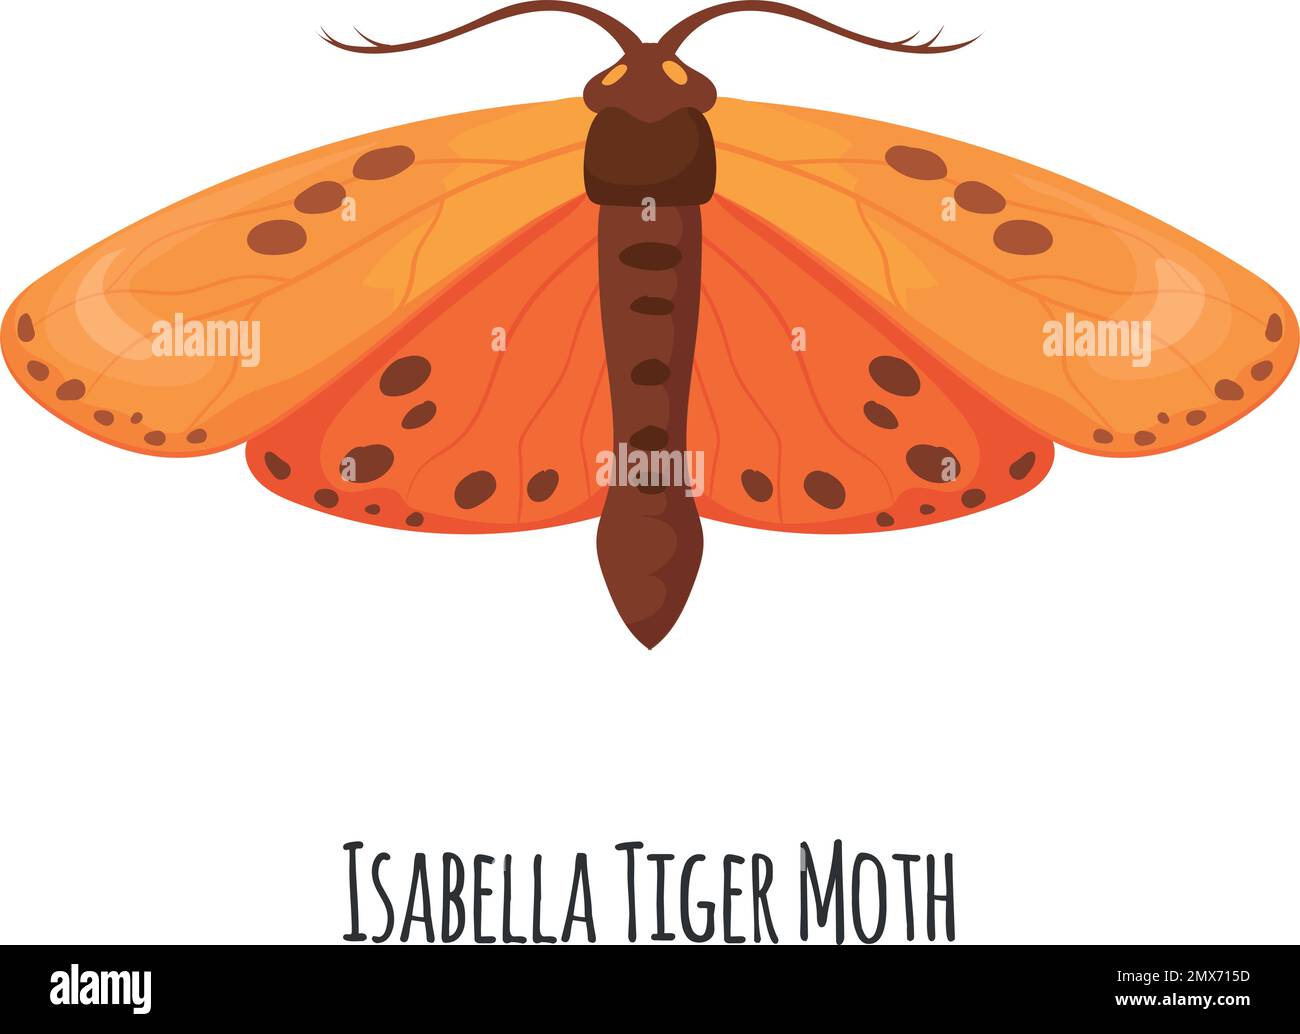 Isabella tiger moth. Ornage winged insect. Wild fauna isolated on white background Stock Vector